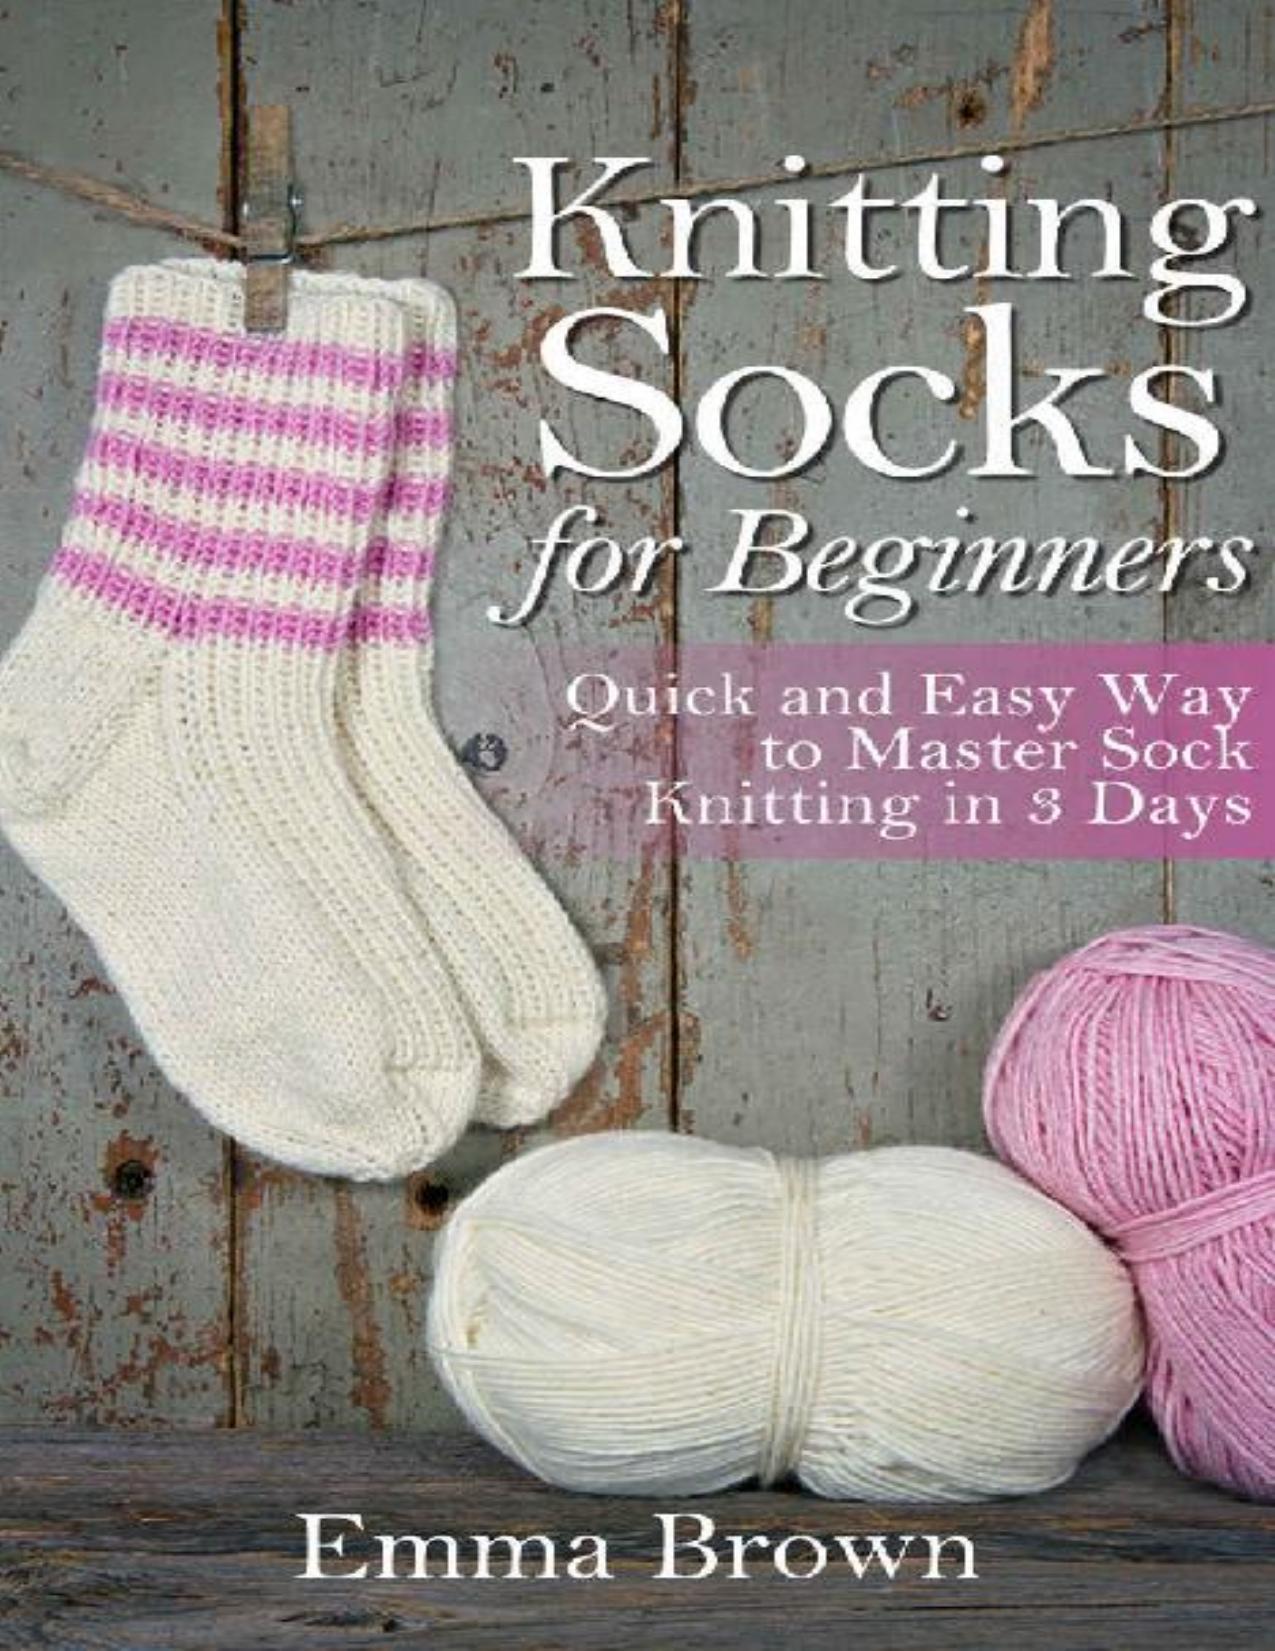 Knitting Socks: Quick and Easy Way to Master Sock Knitting in 3 Days (Sock Knitting Patterns Book 1) by Emma Brown